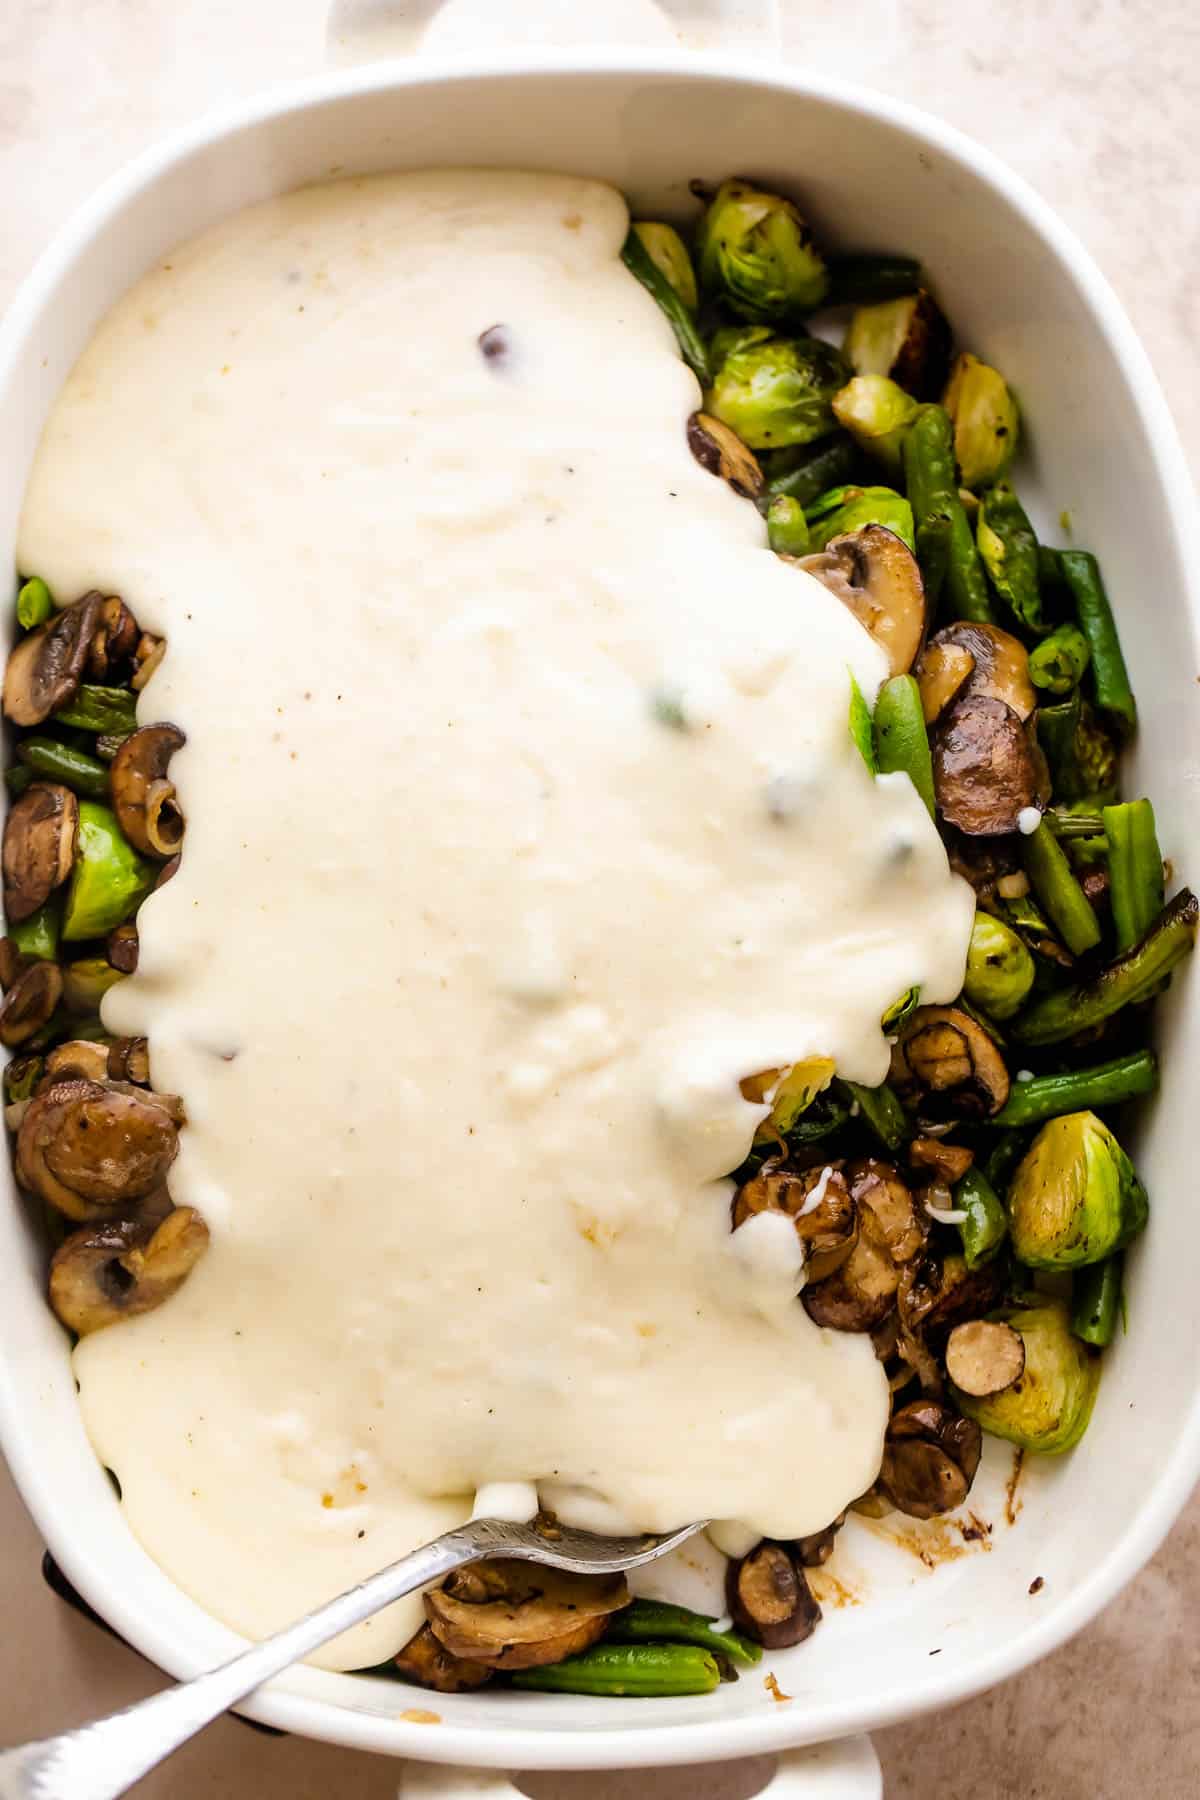 creamy sauce poured over brussel sprouts and green beans in a white baking dish